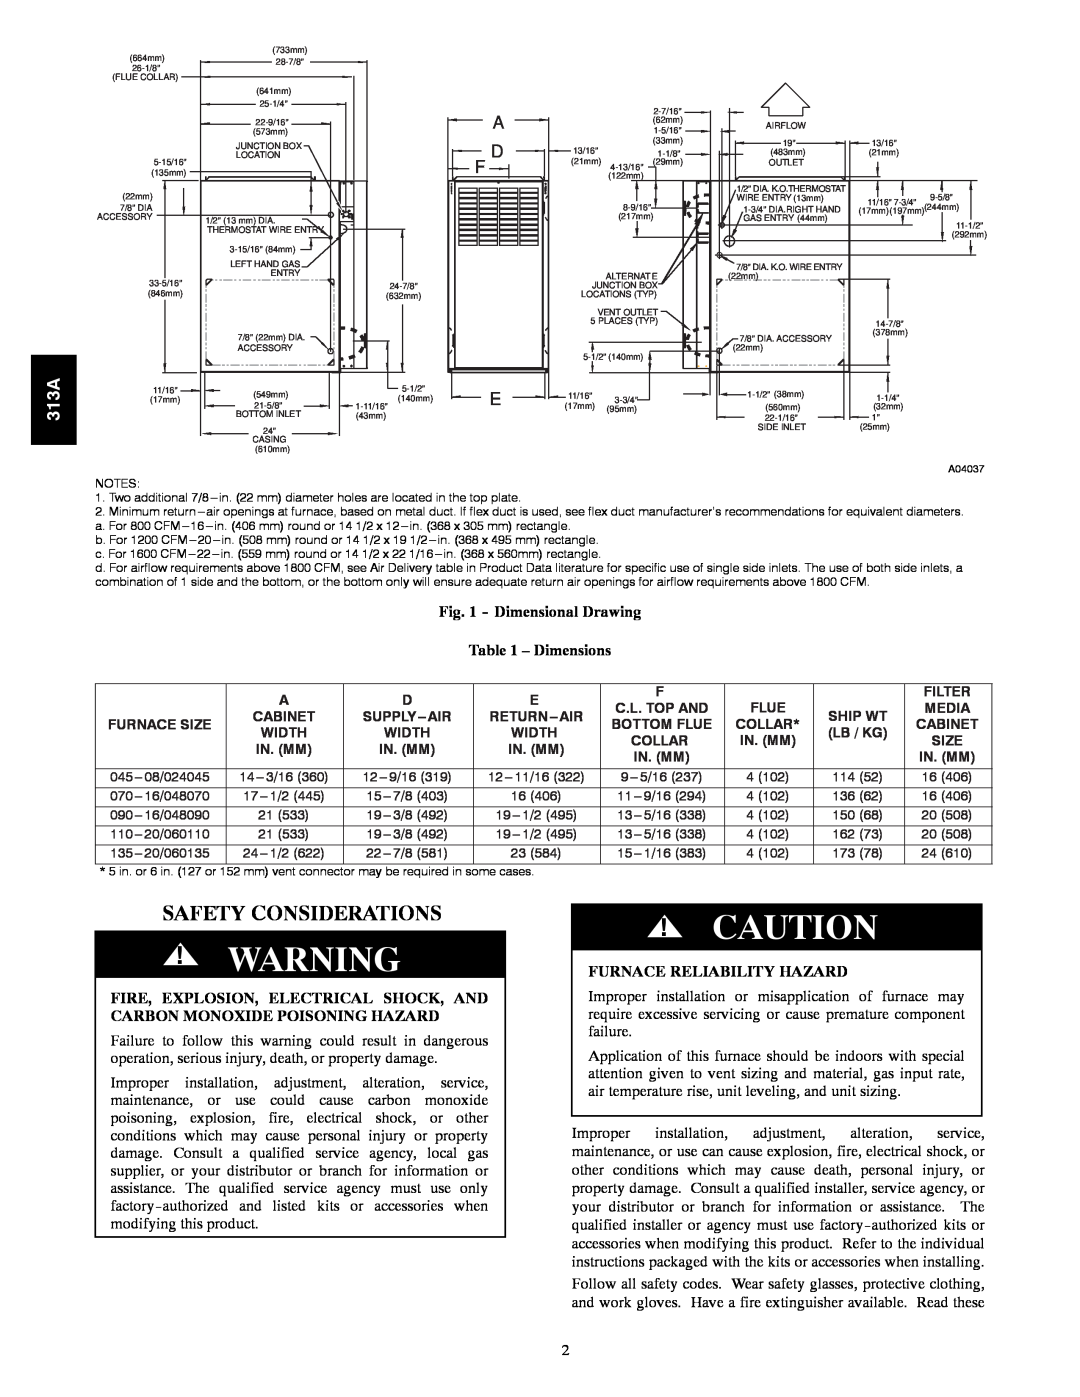 Bryant 313AAV instruction manual Safety Considerations, Dimensional Drawing - Dimensions, Furnace Reliability Hazard 